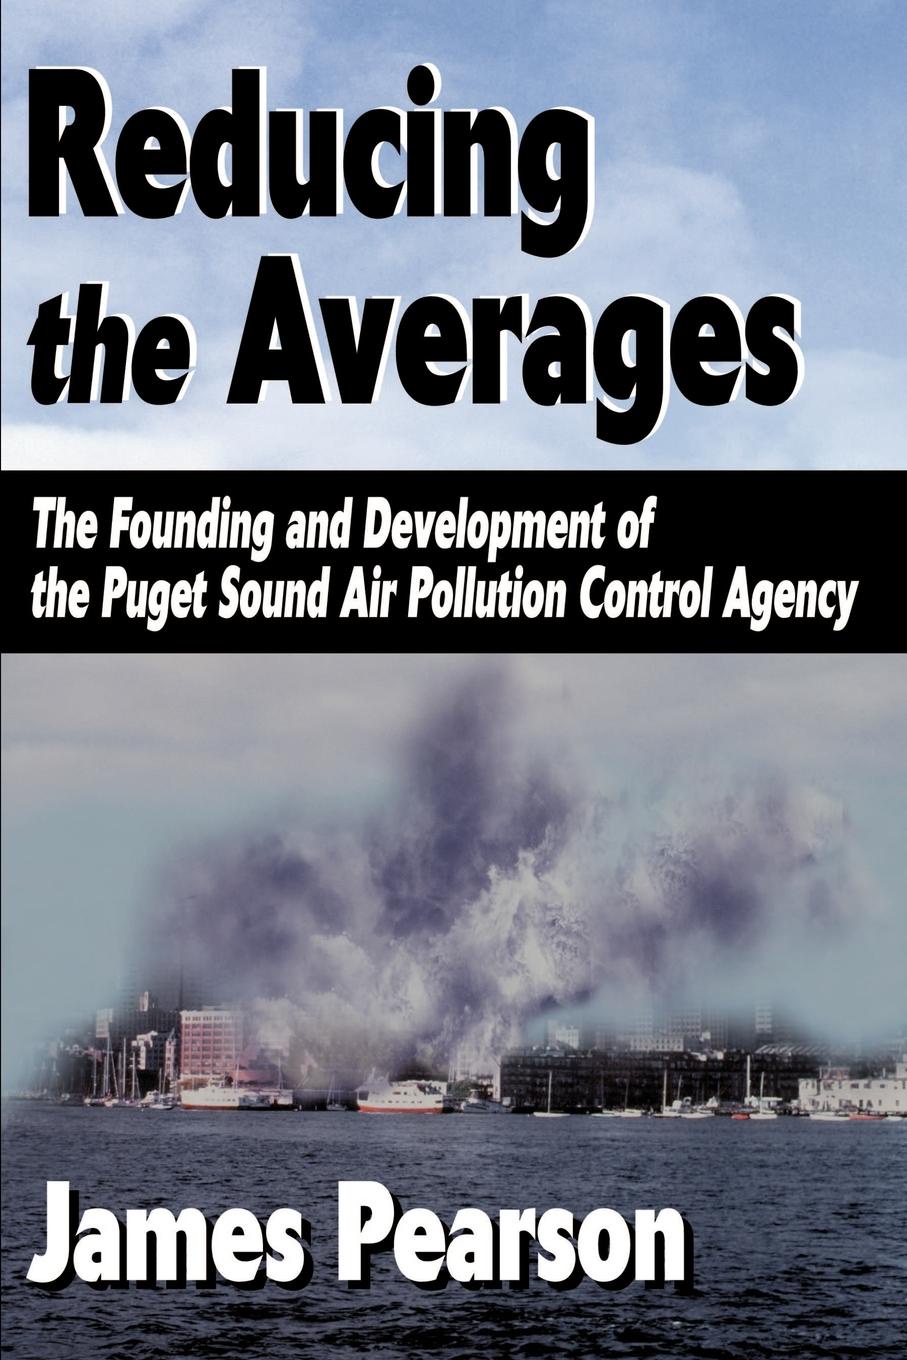 Reducing the Averages. The Founding and Development of the Puget Sound Air Pollution Control Agency